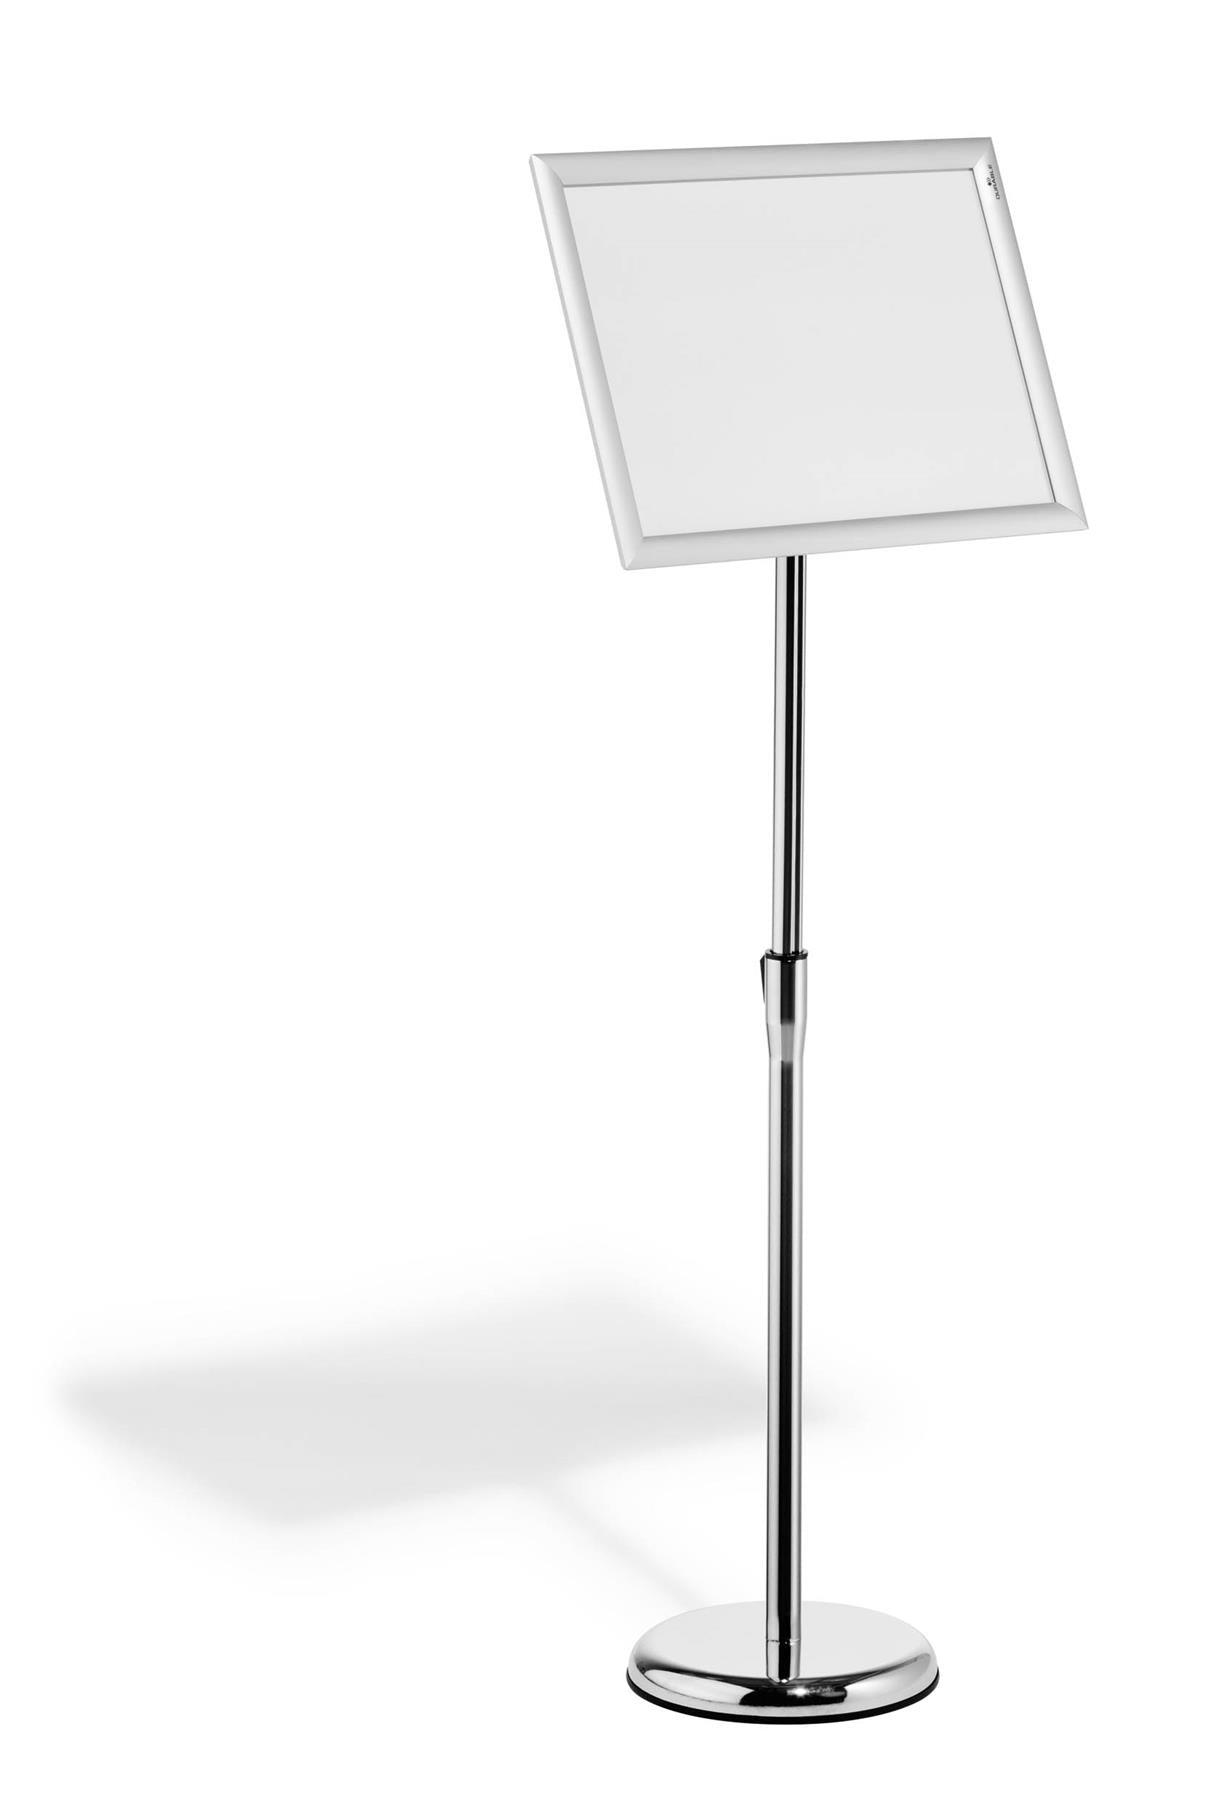 Durable Floor Stand with Aluminium Snap Frame Menu Poster Display | A3